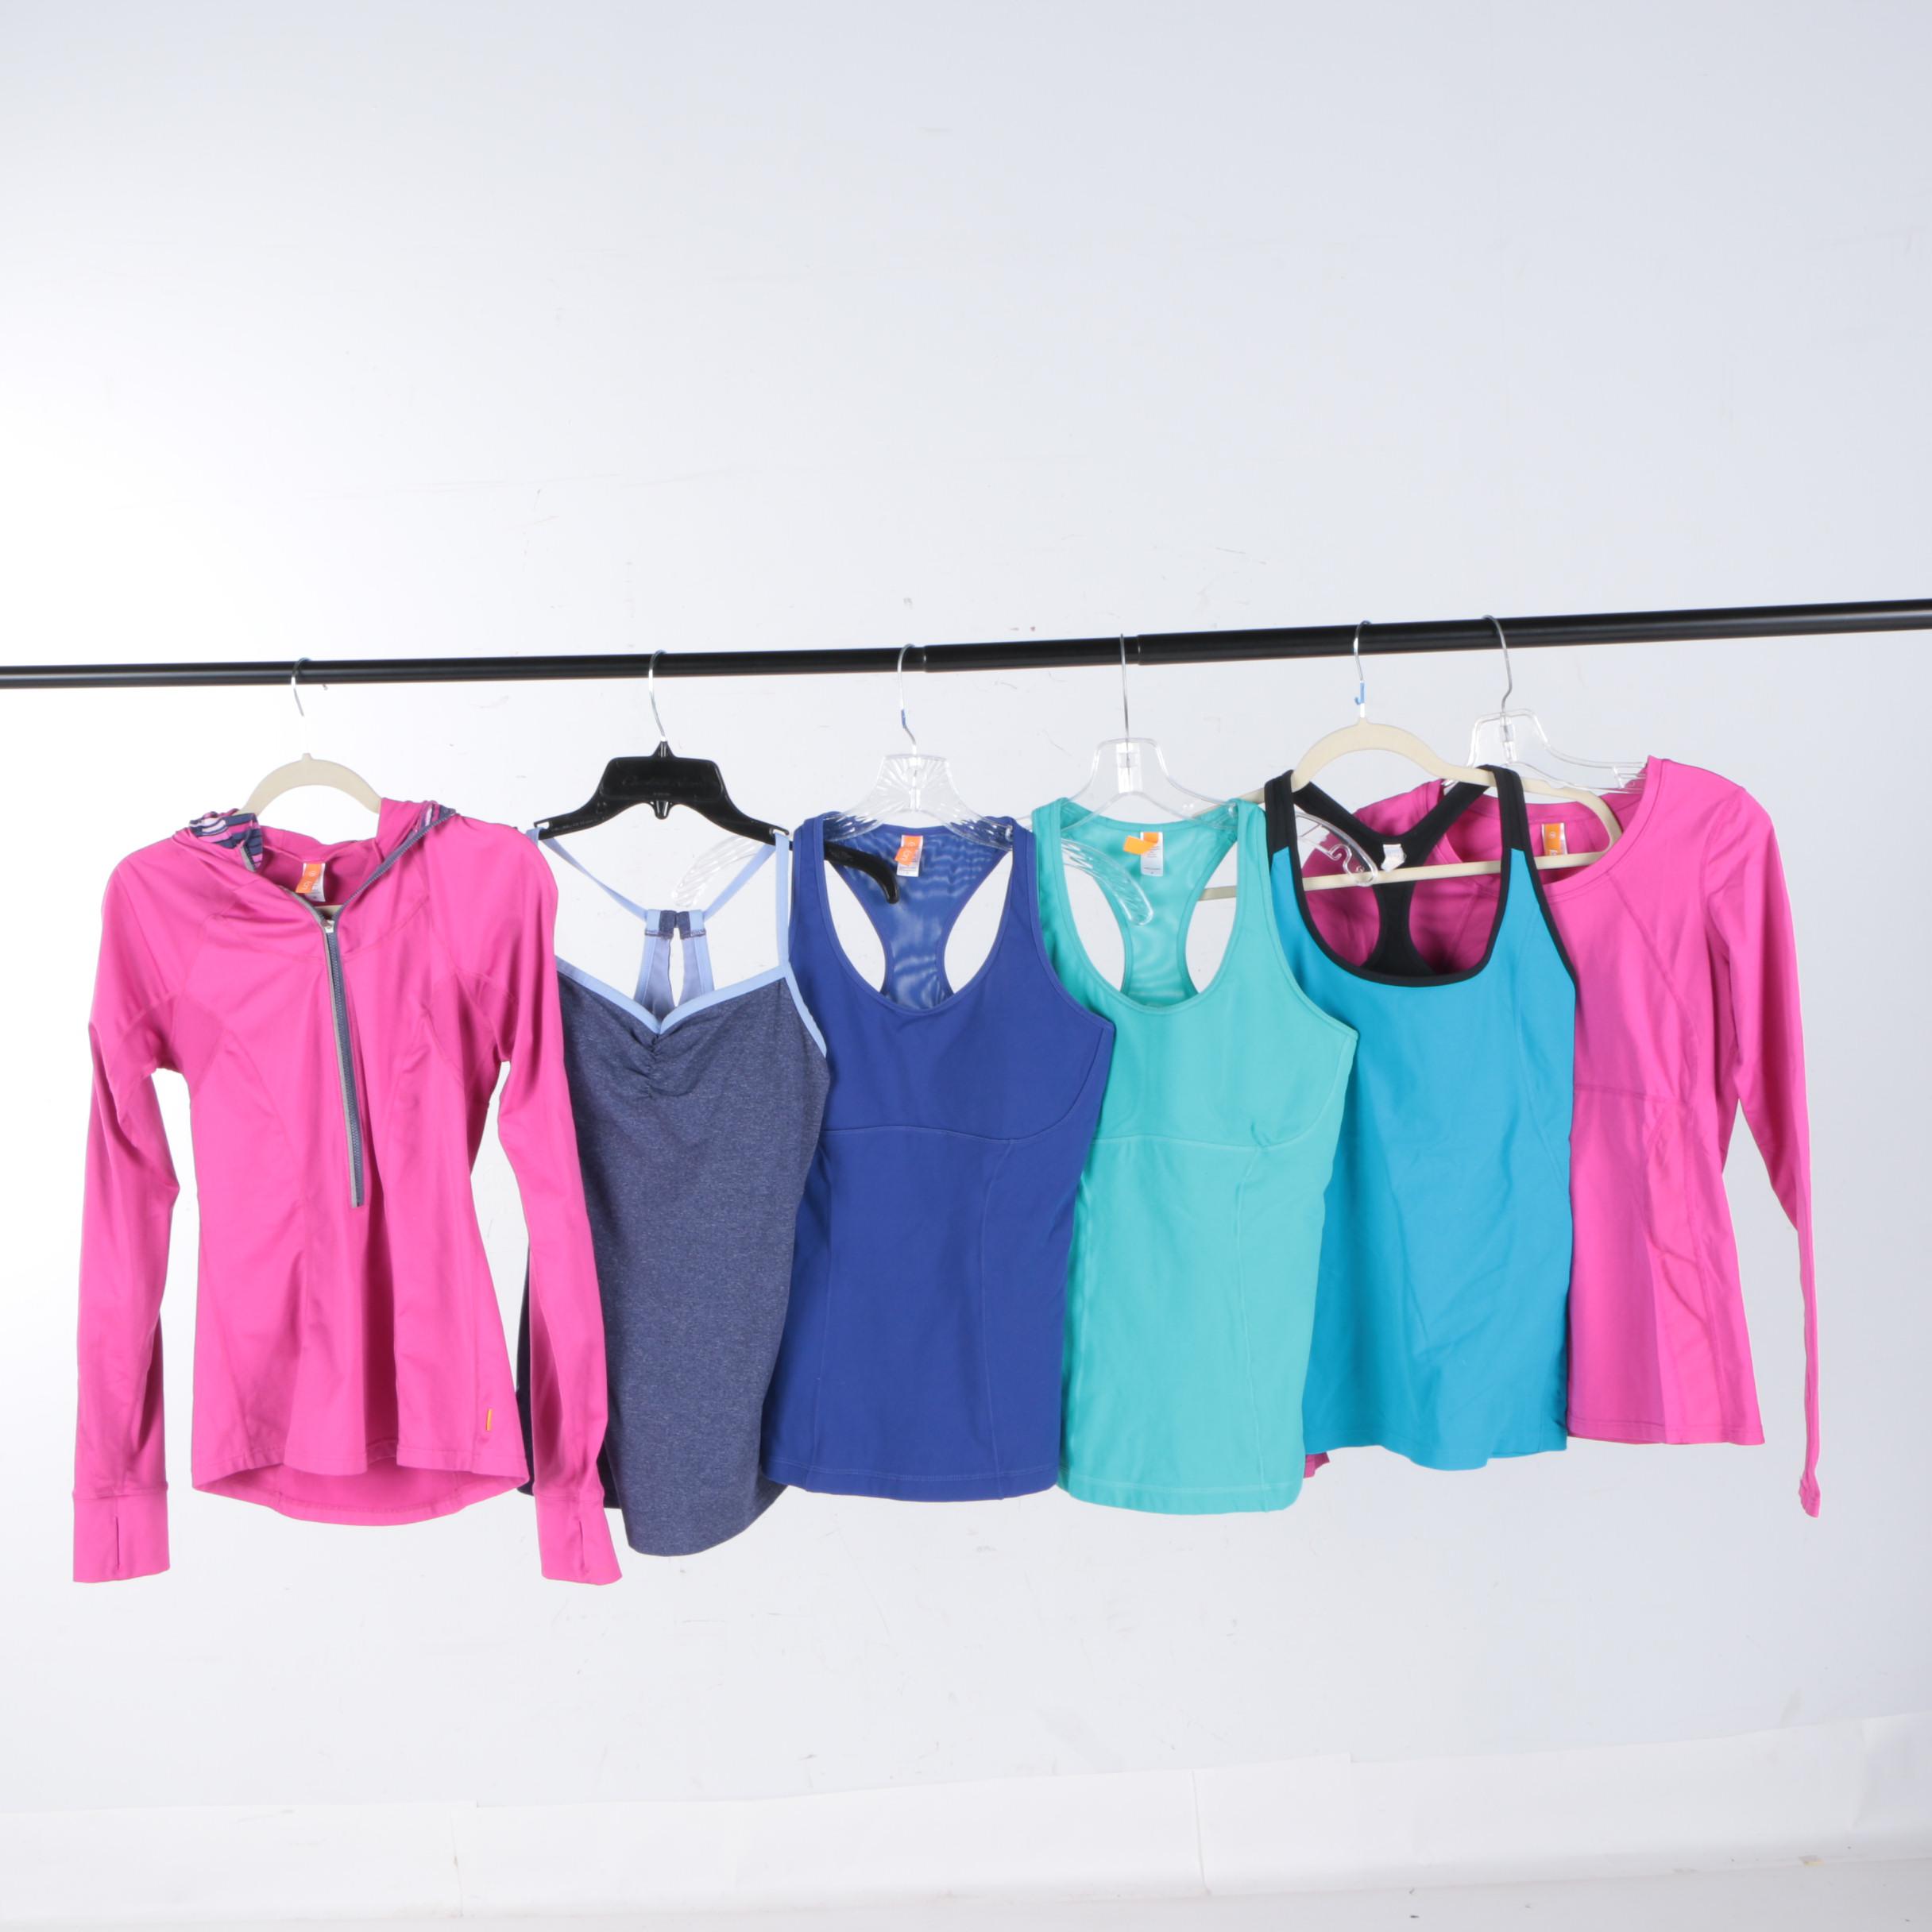 lucy athletic wear